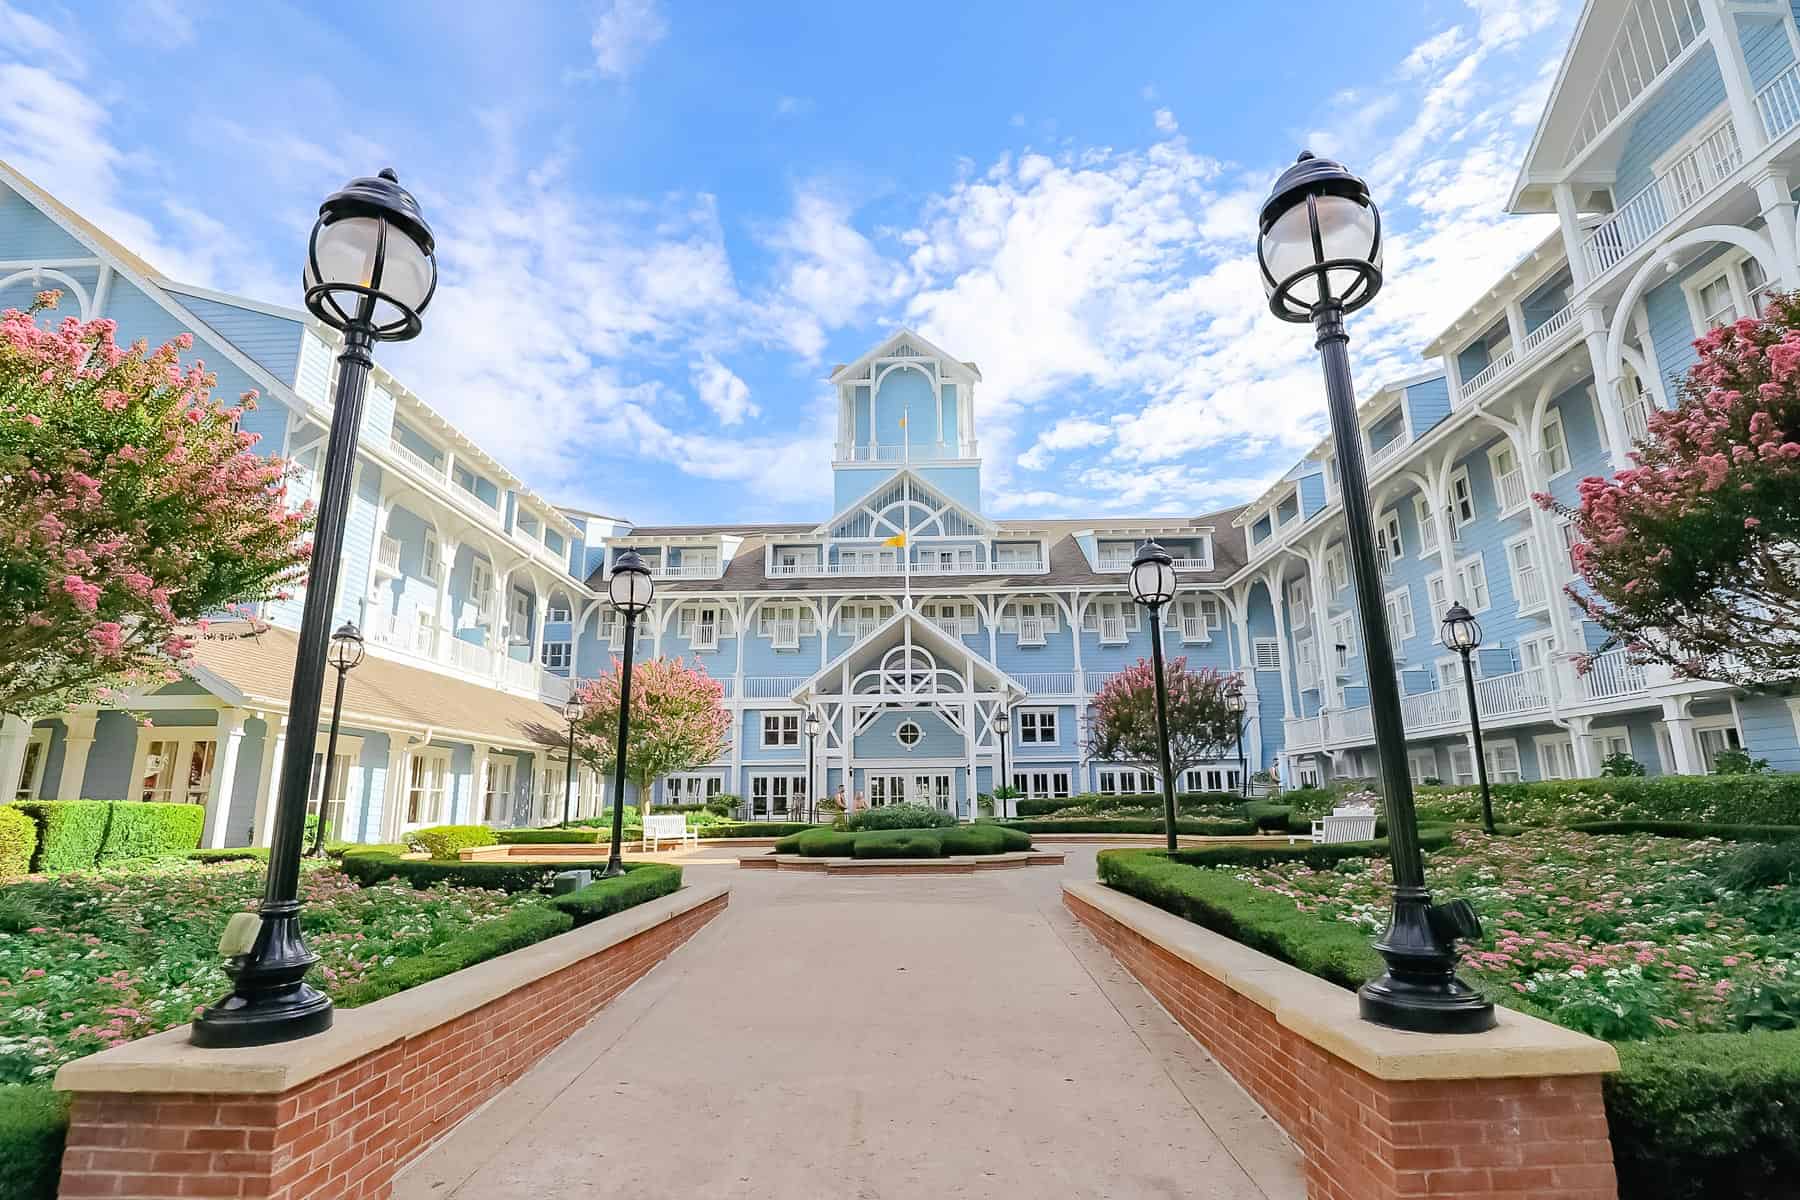 A Resorts Gal Review of Staying Club Level at Disney’s Beach Club